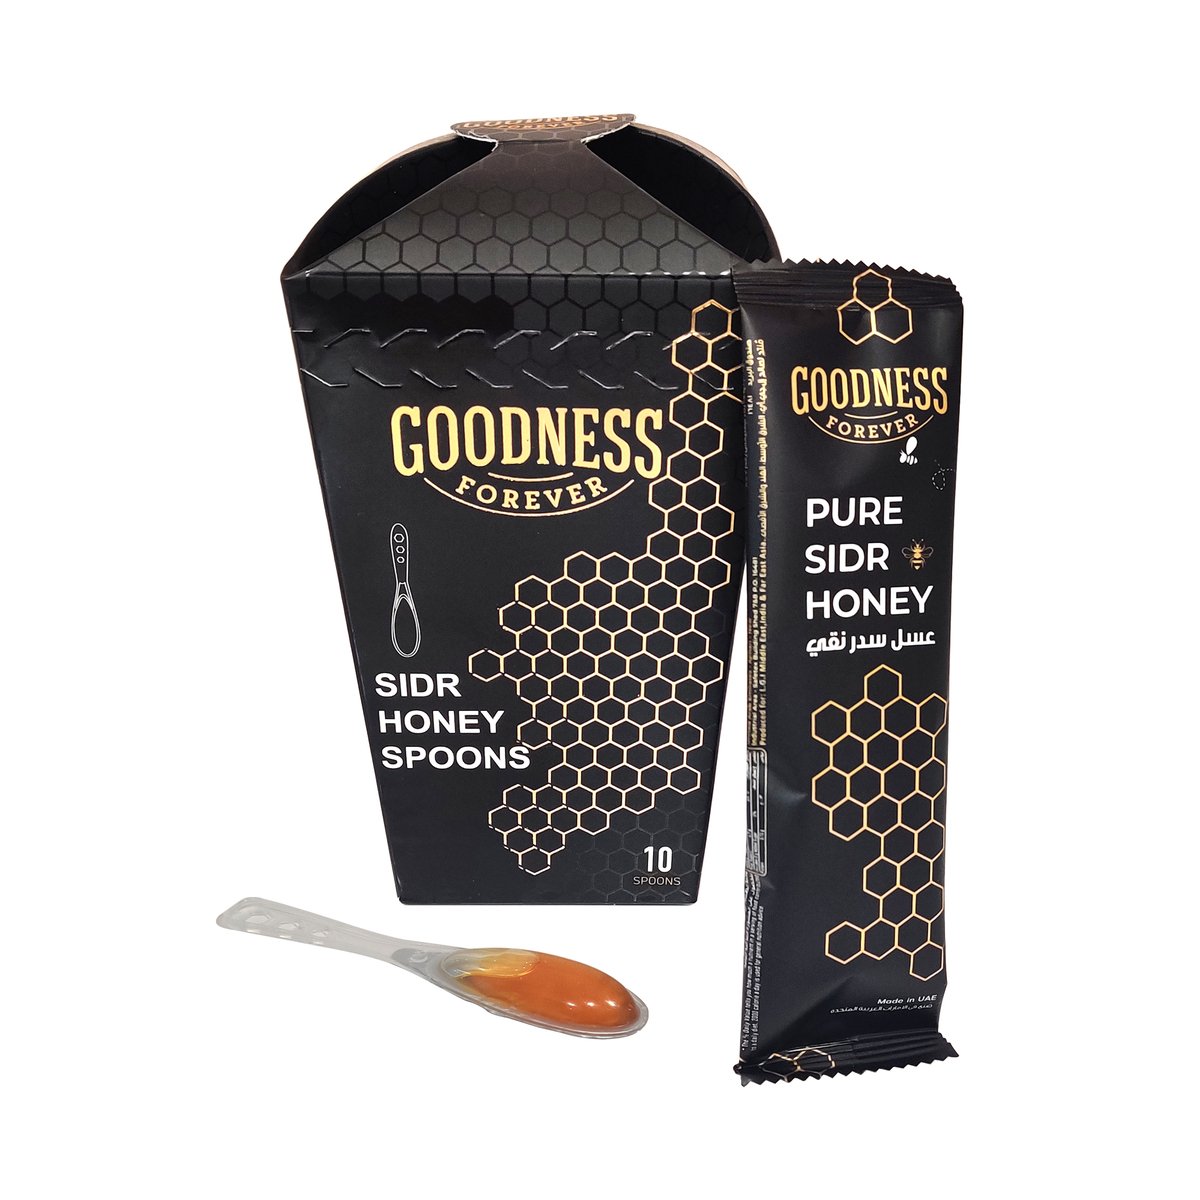 Goodness Forever Sidr Honey Spoon 10 x 7 g